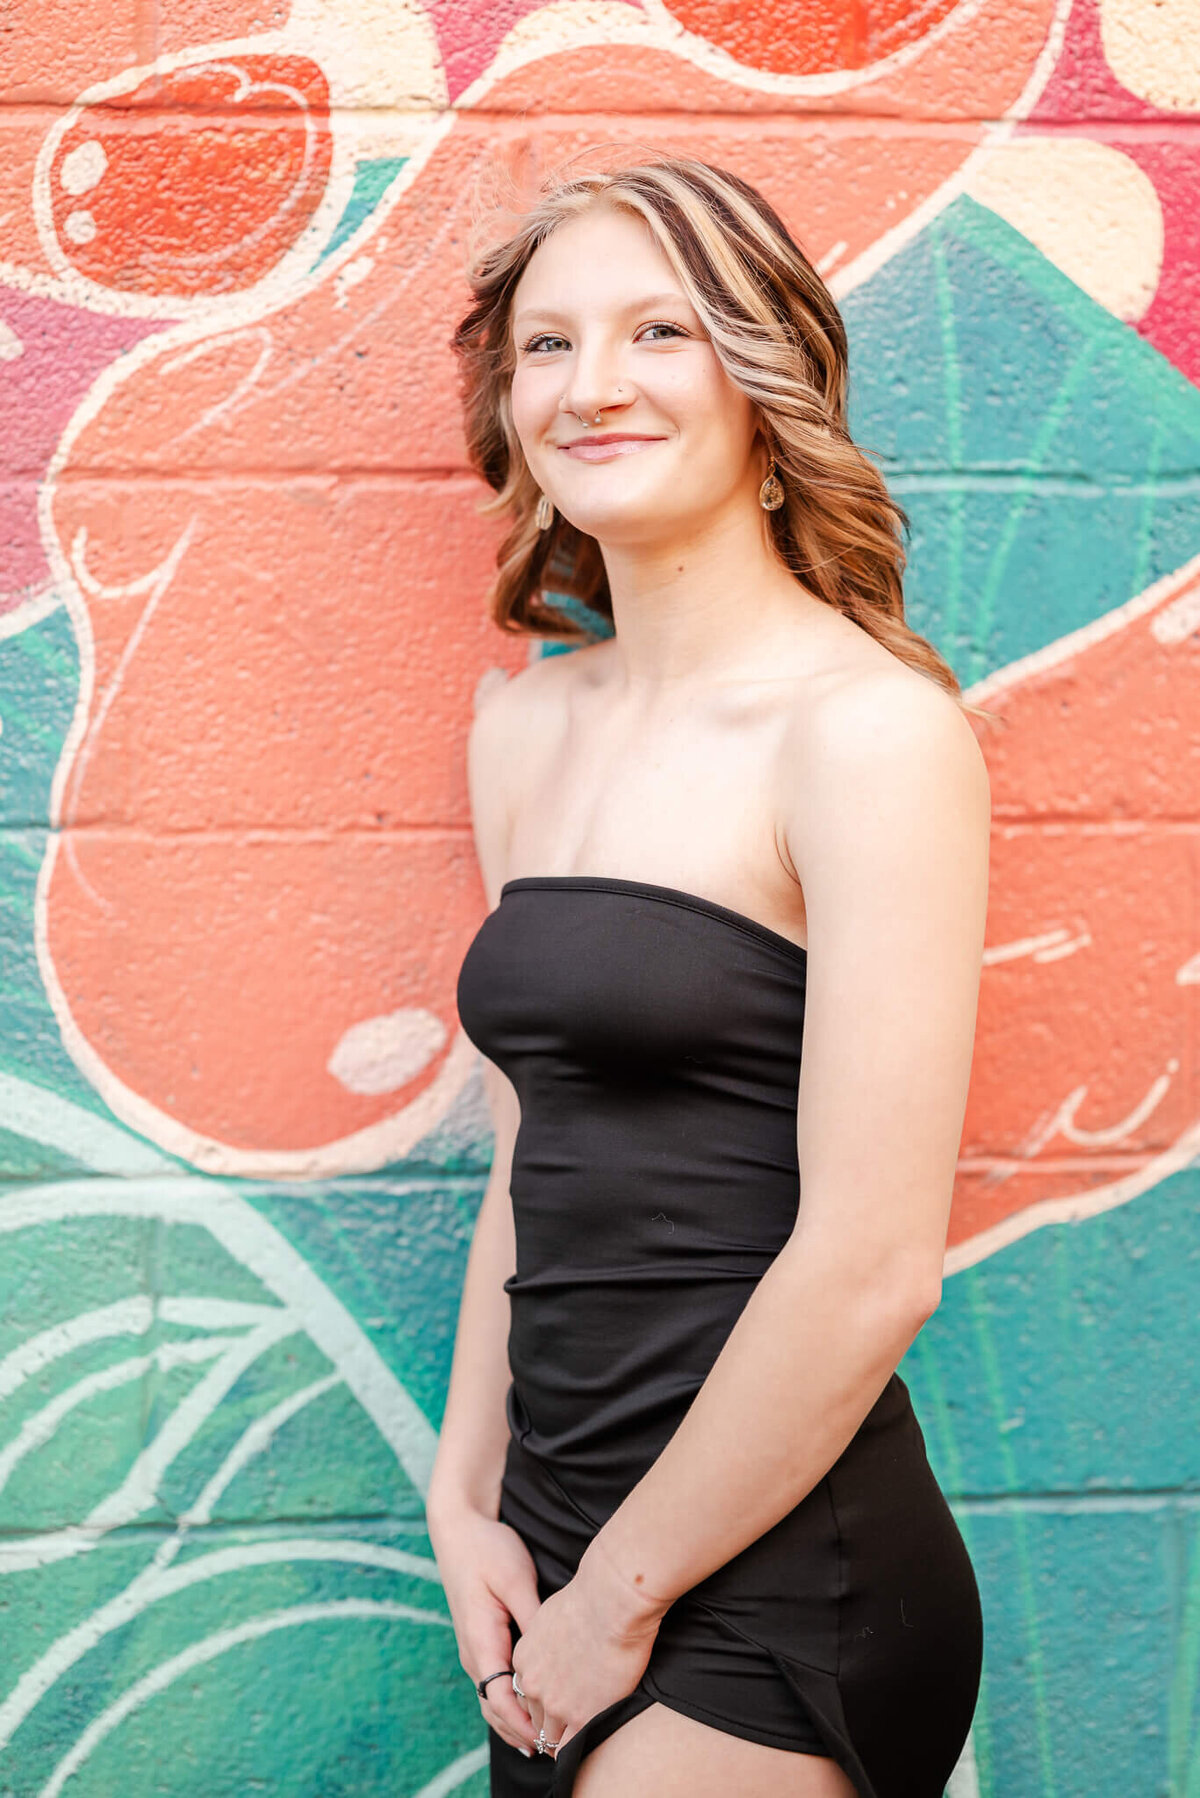 A high school senior, wearing a black dress, leans against a wall with a colorful mural. She is having her senior session with Chesapeake Senior Photographer, Justine Renee Photography.